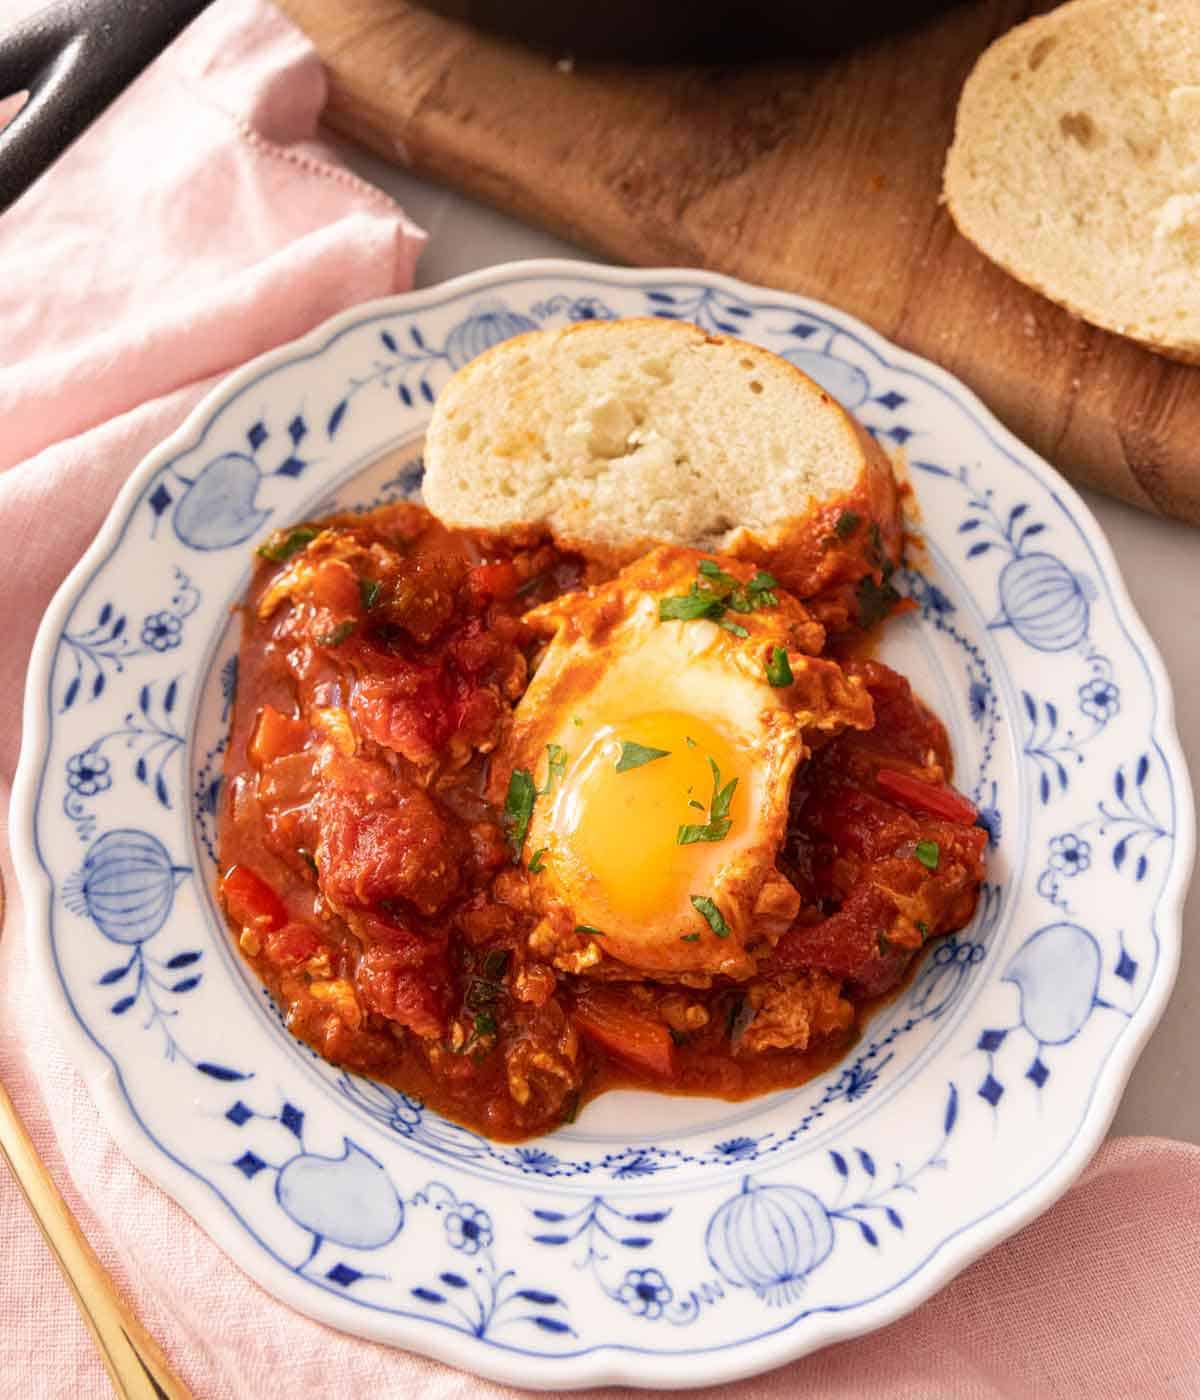 A plate of shakshuka with a slice of bread.